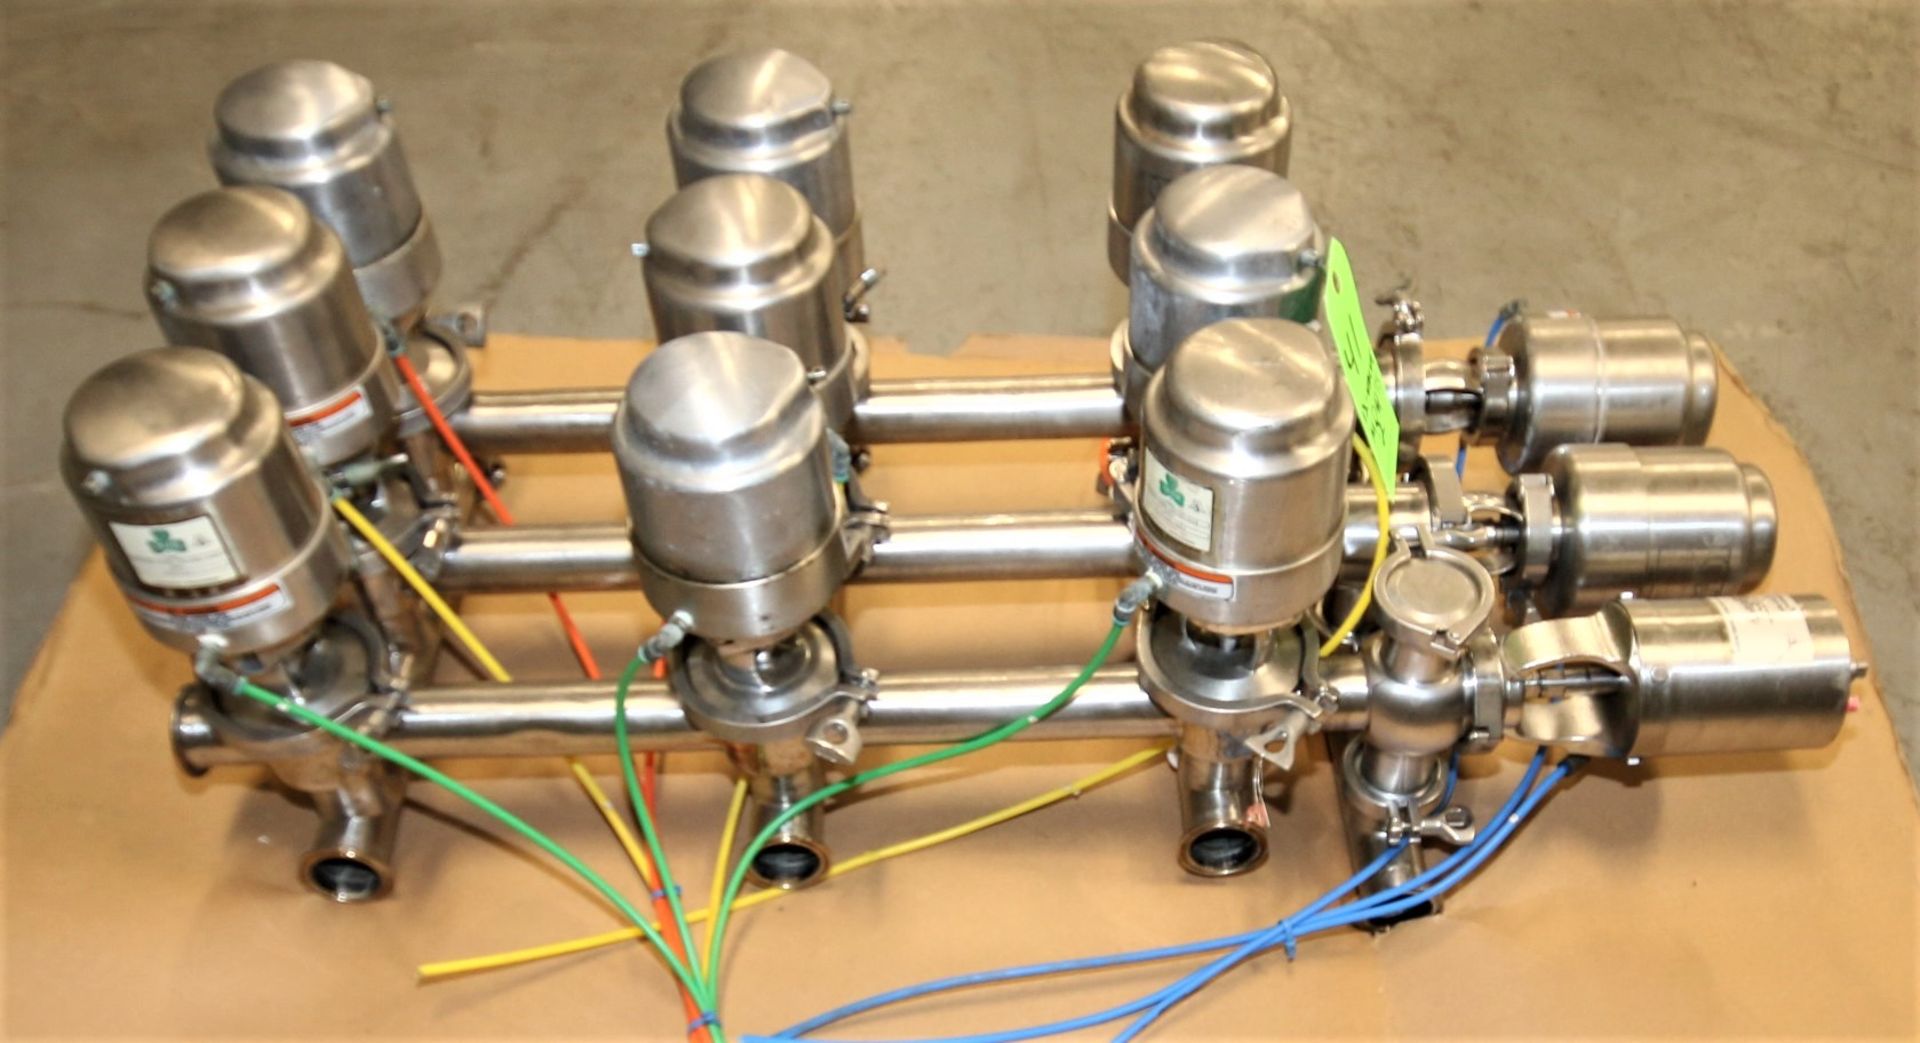 12-Valve Tri-Clover & WCB 2" S/S Air Valve Manifold / Cluster with Model 361 Valves, - Image 4 of 4